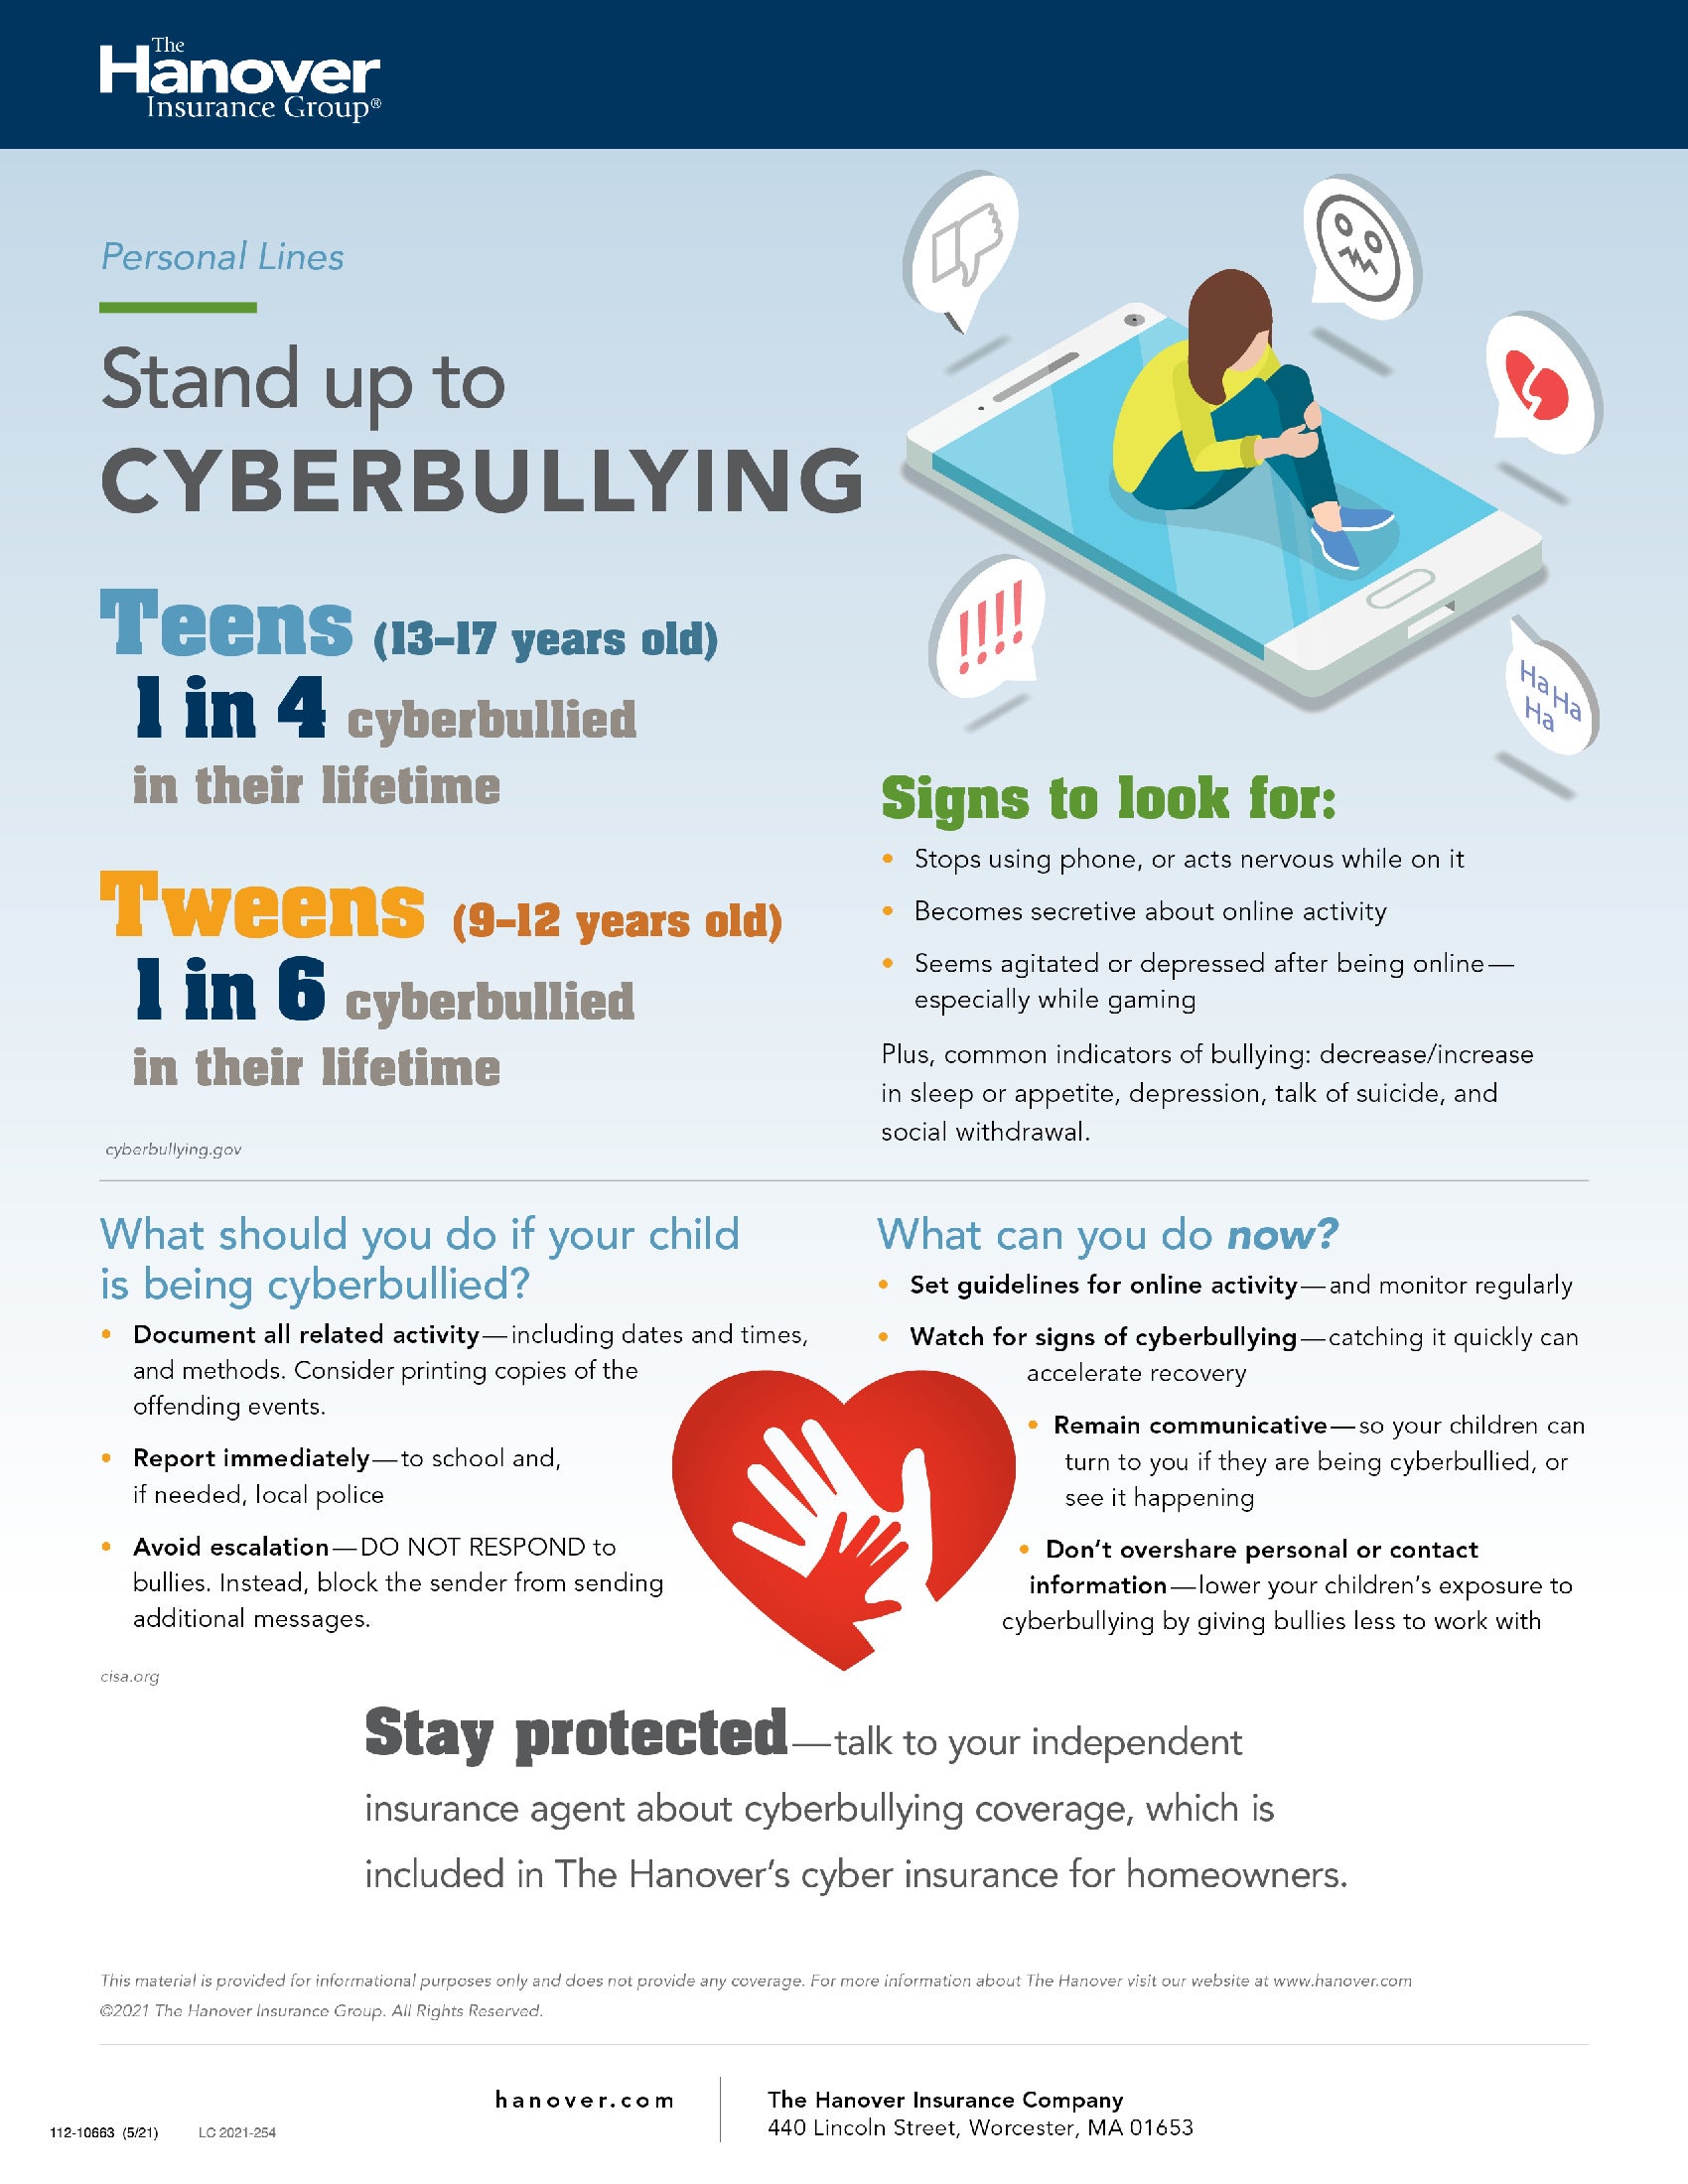 Cyberbullying stats infographic